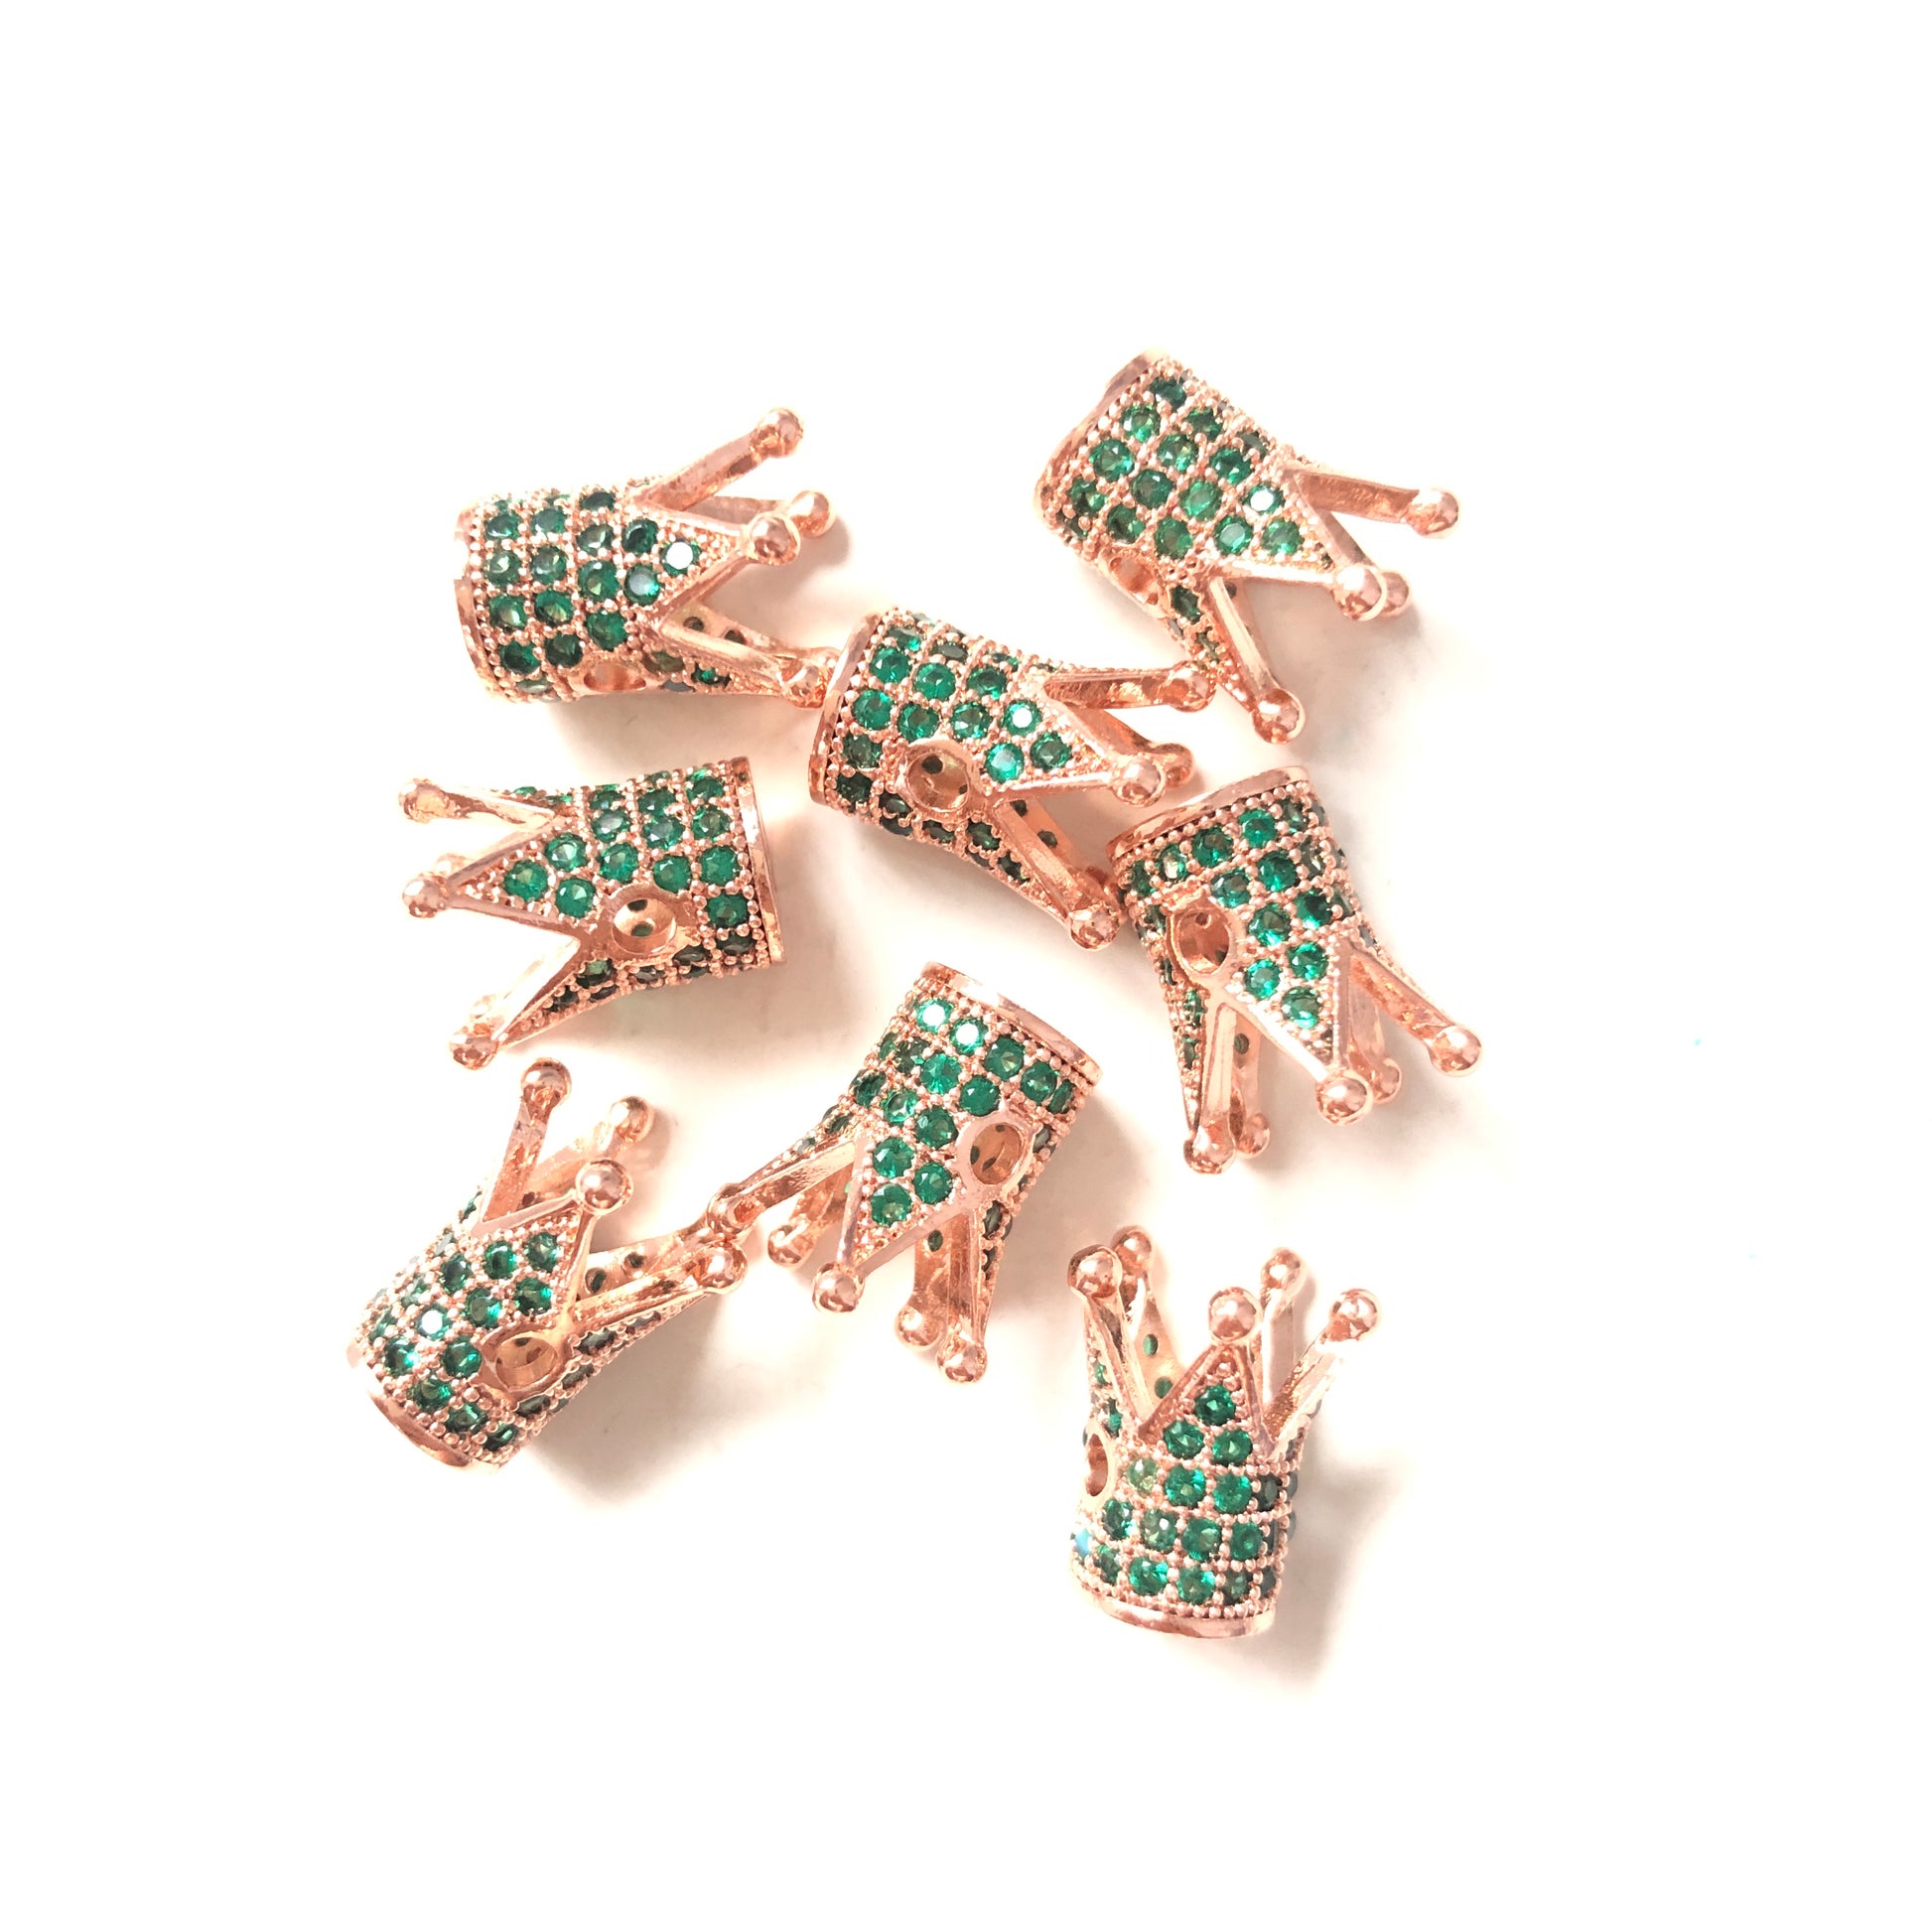 10pcs/lot Green CZ Paved Crown Spacers Rose Gold CZ Paved Spacers Colorful Zirconia Crown Beads Charms Beads Beyond